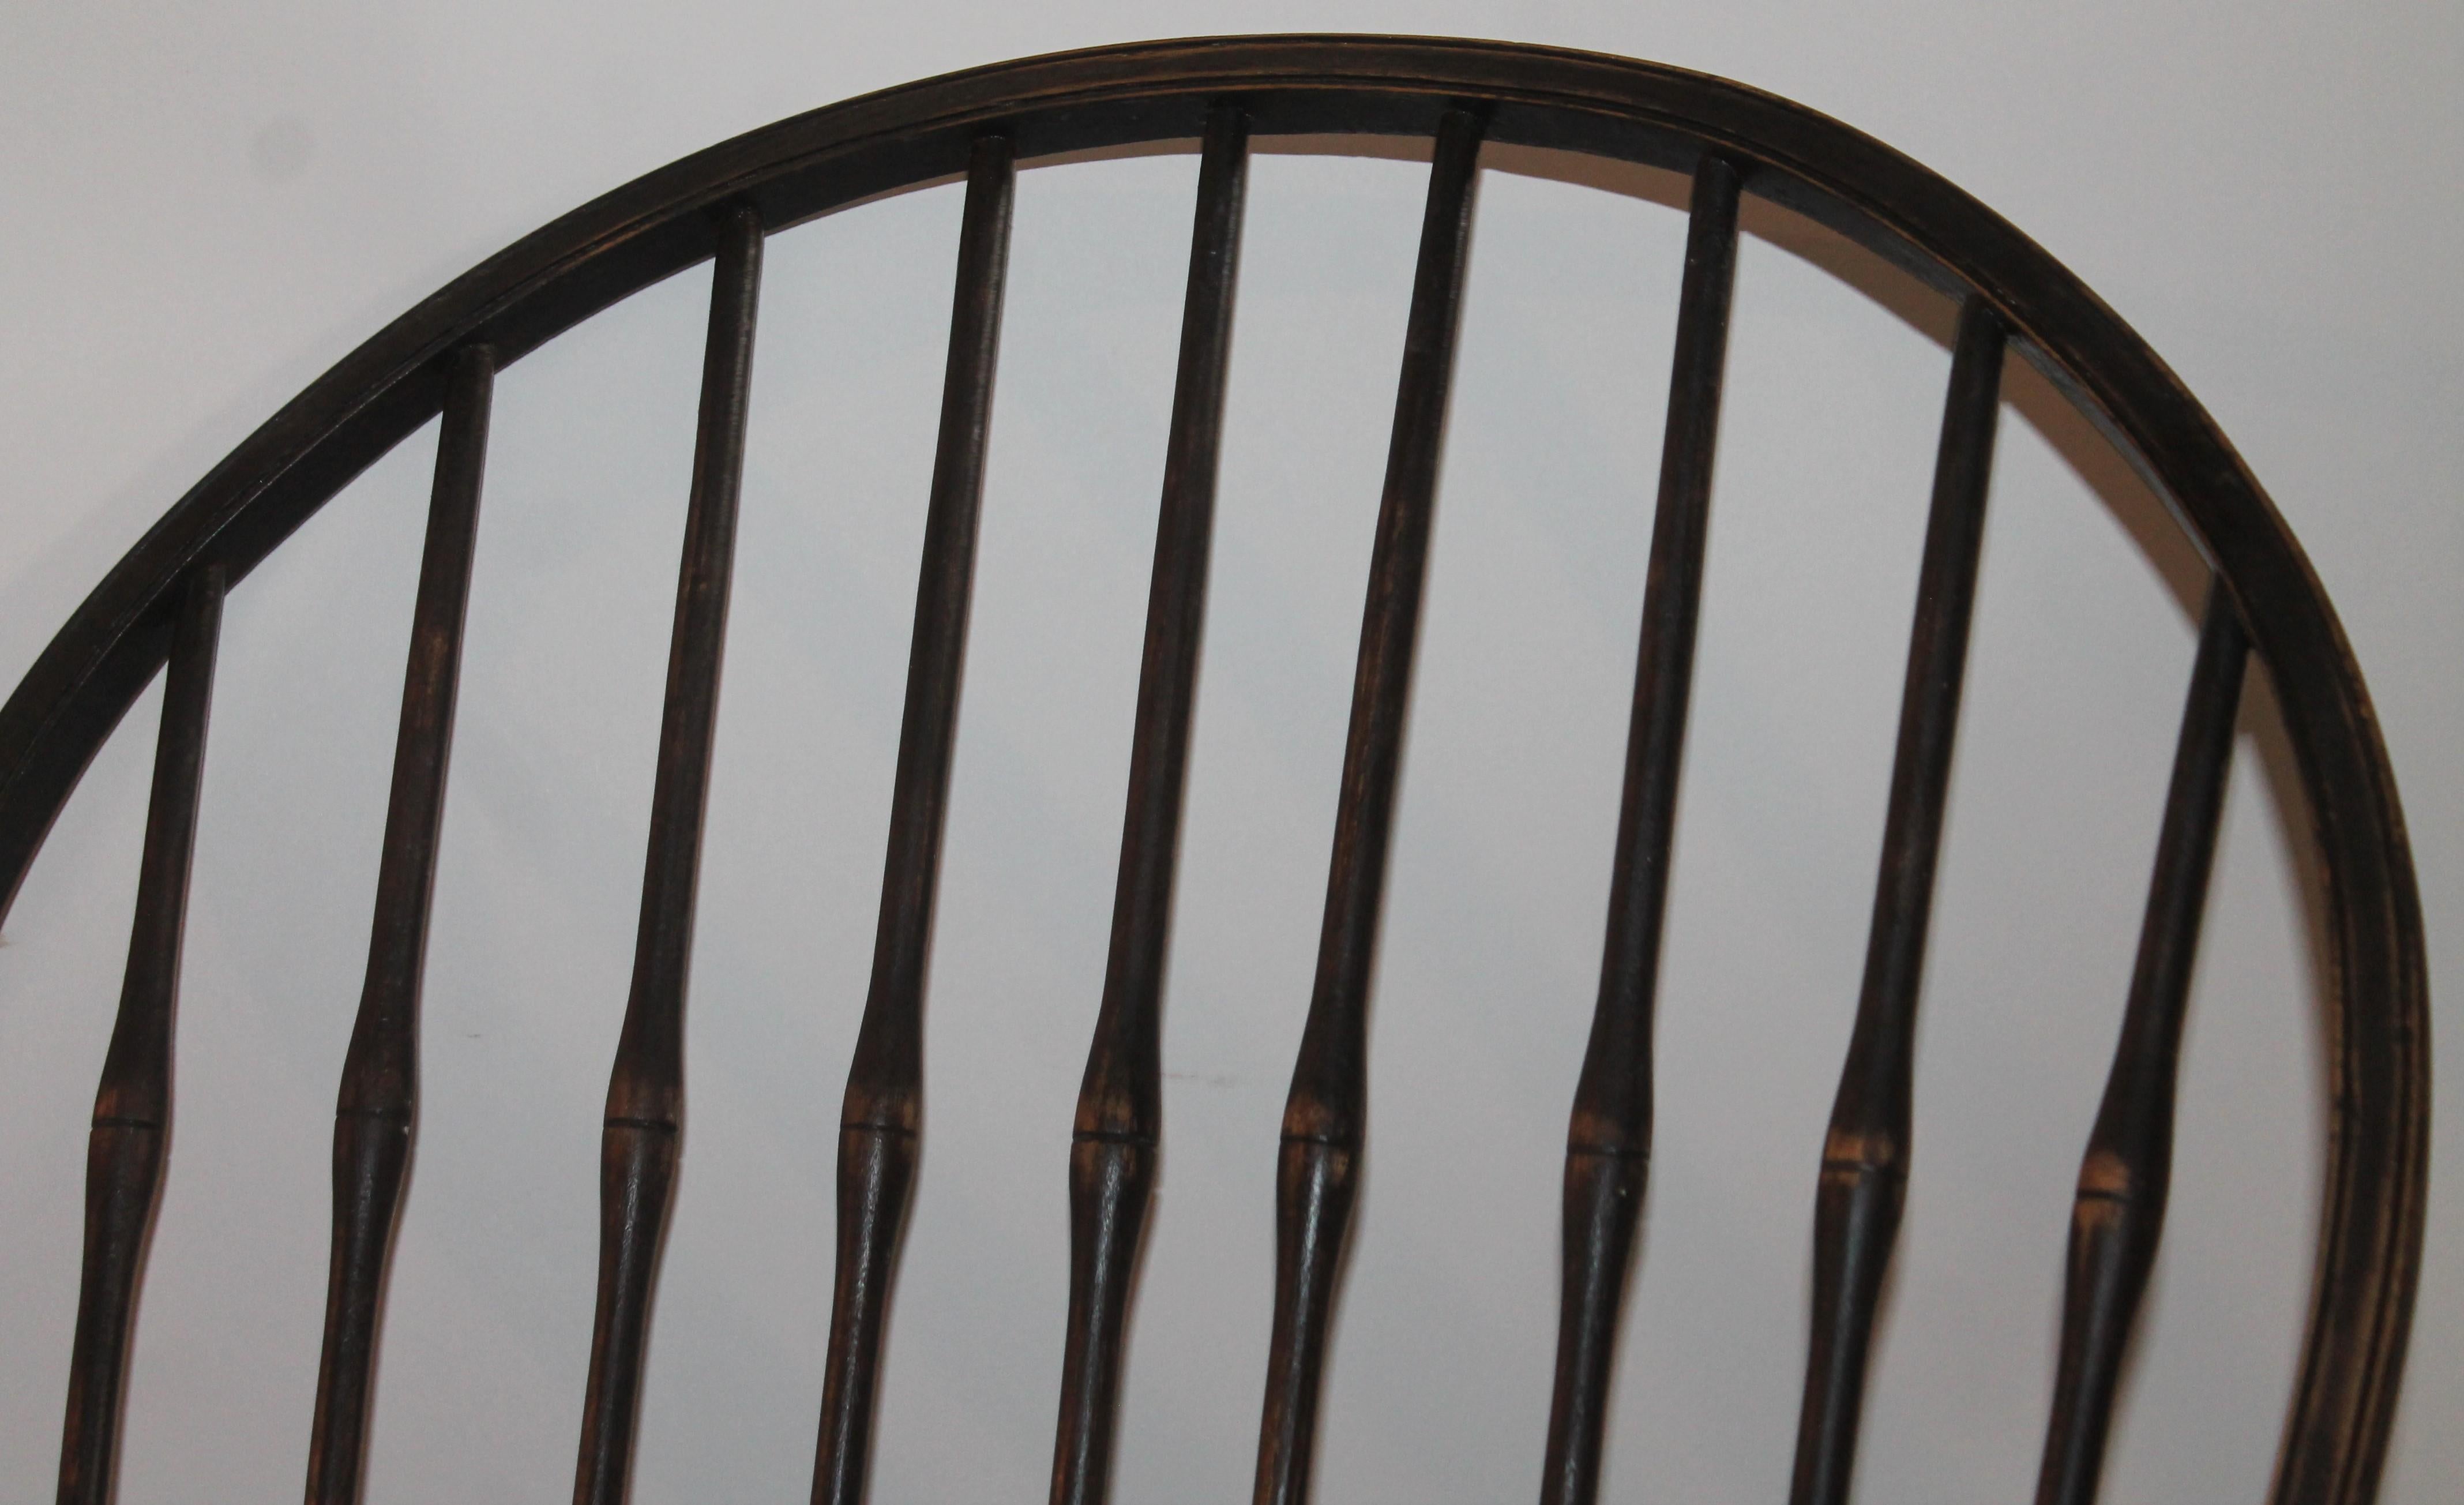 This 19th century Windsor chair is in fine condition and has a black original stain finish. There is a label on the bottom of the seat. It is from Suracuse, New York and made by Edmonds Furniture Company and retains the original makers label. The